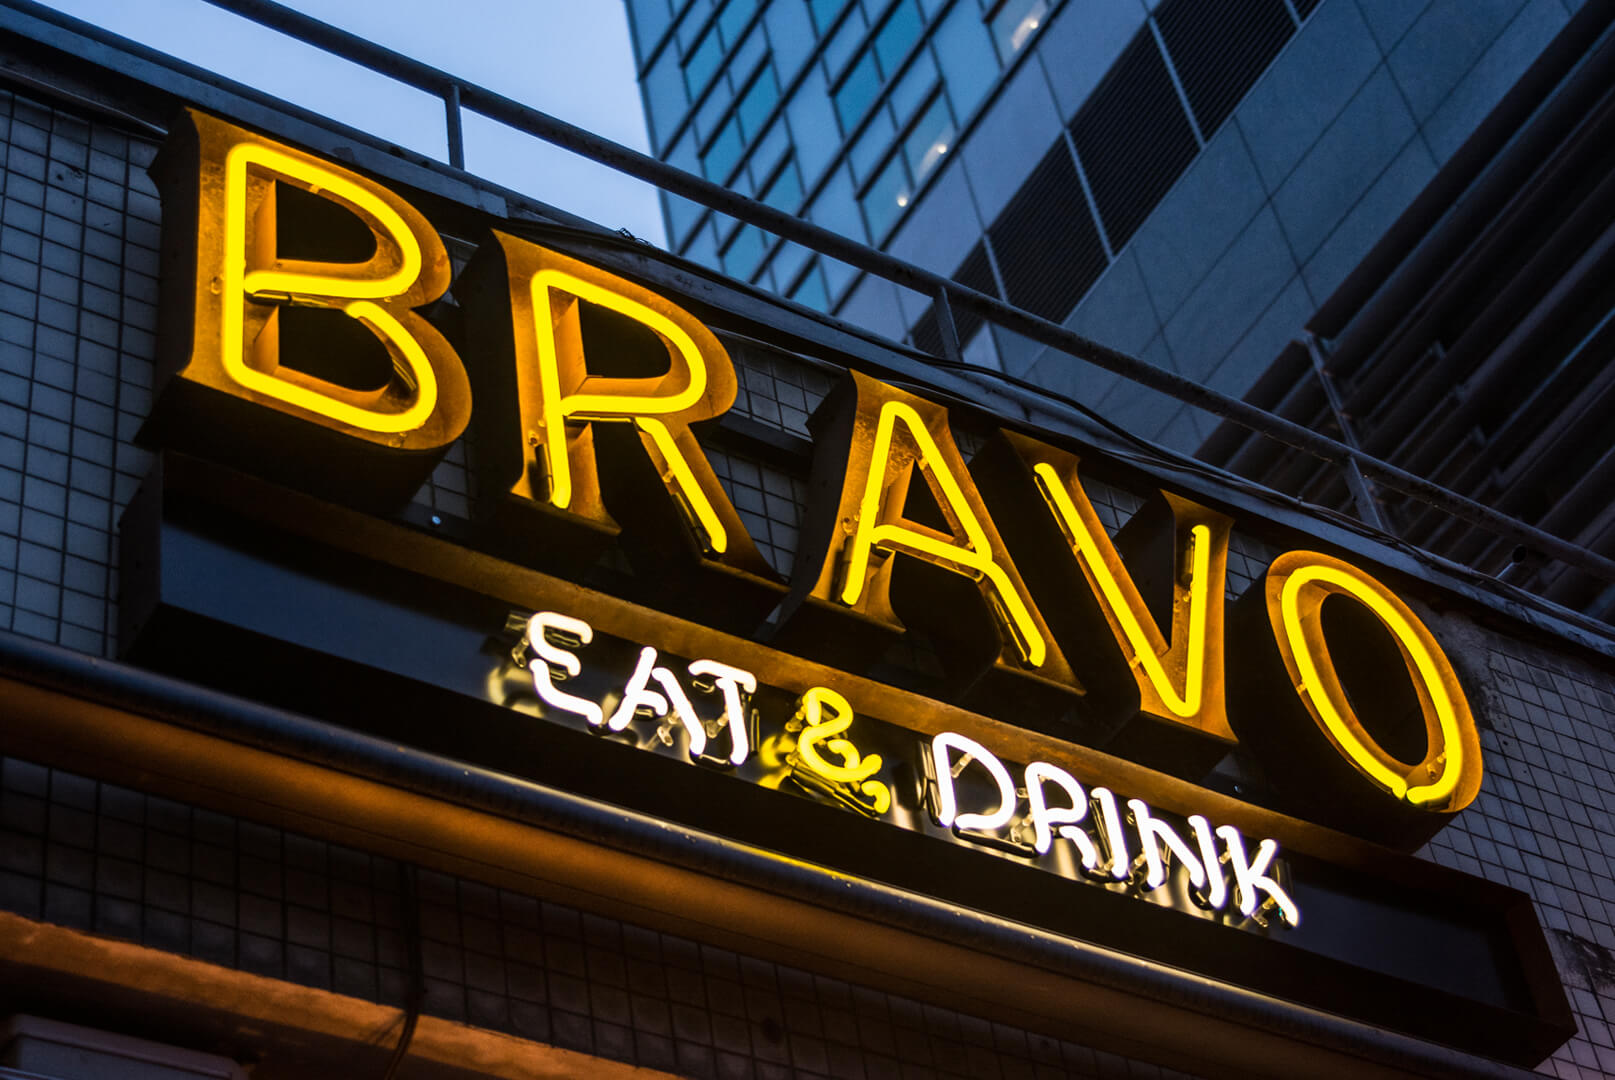 BRAVO - neon-bravo-eat-drink-neon-above-entry-to-the-restaurant-neon-on-the-shelf-neon-on-the-shelf-wall-neon-under-light-neon-inside-steel-neon-on-the-extra-wall-neon-warsaw-central